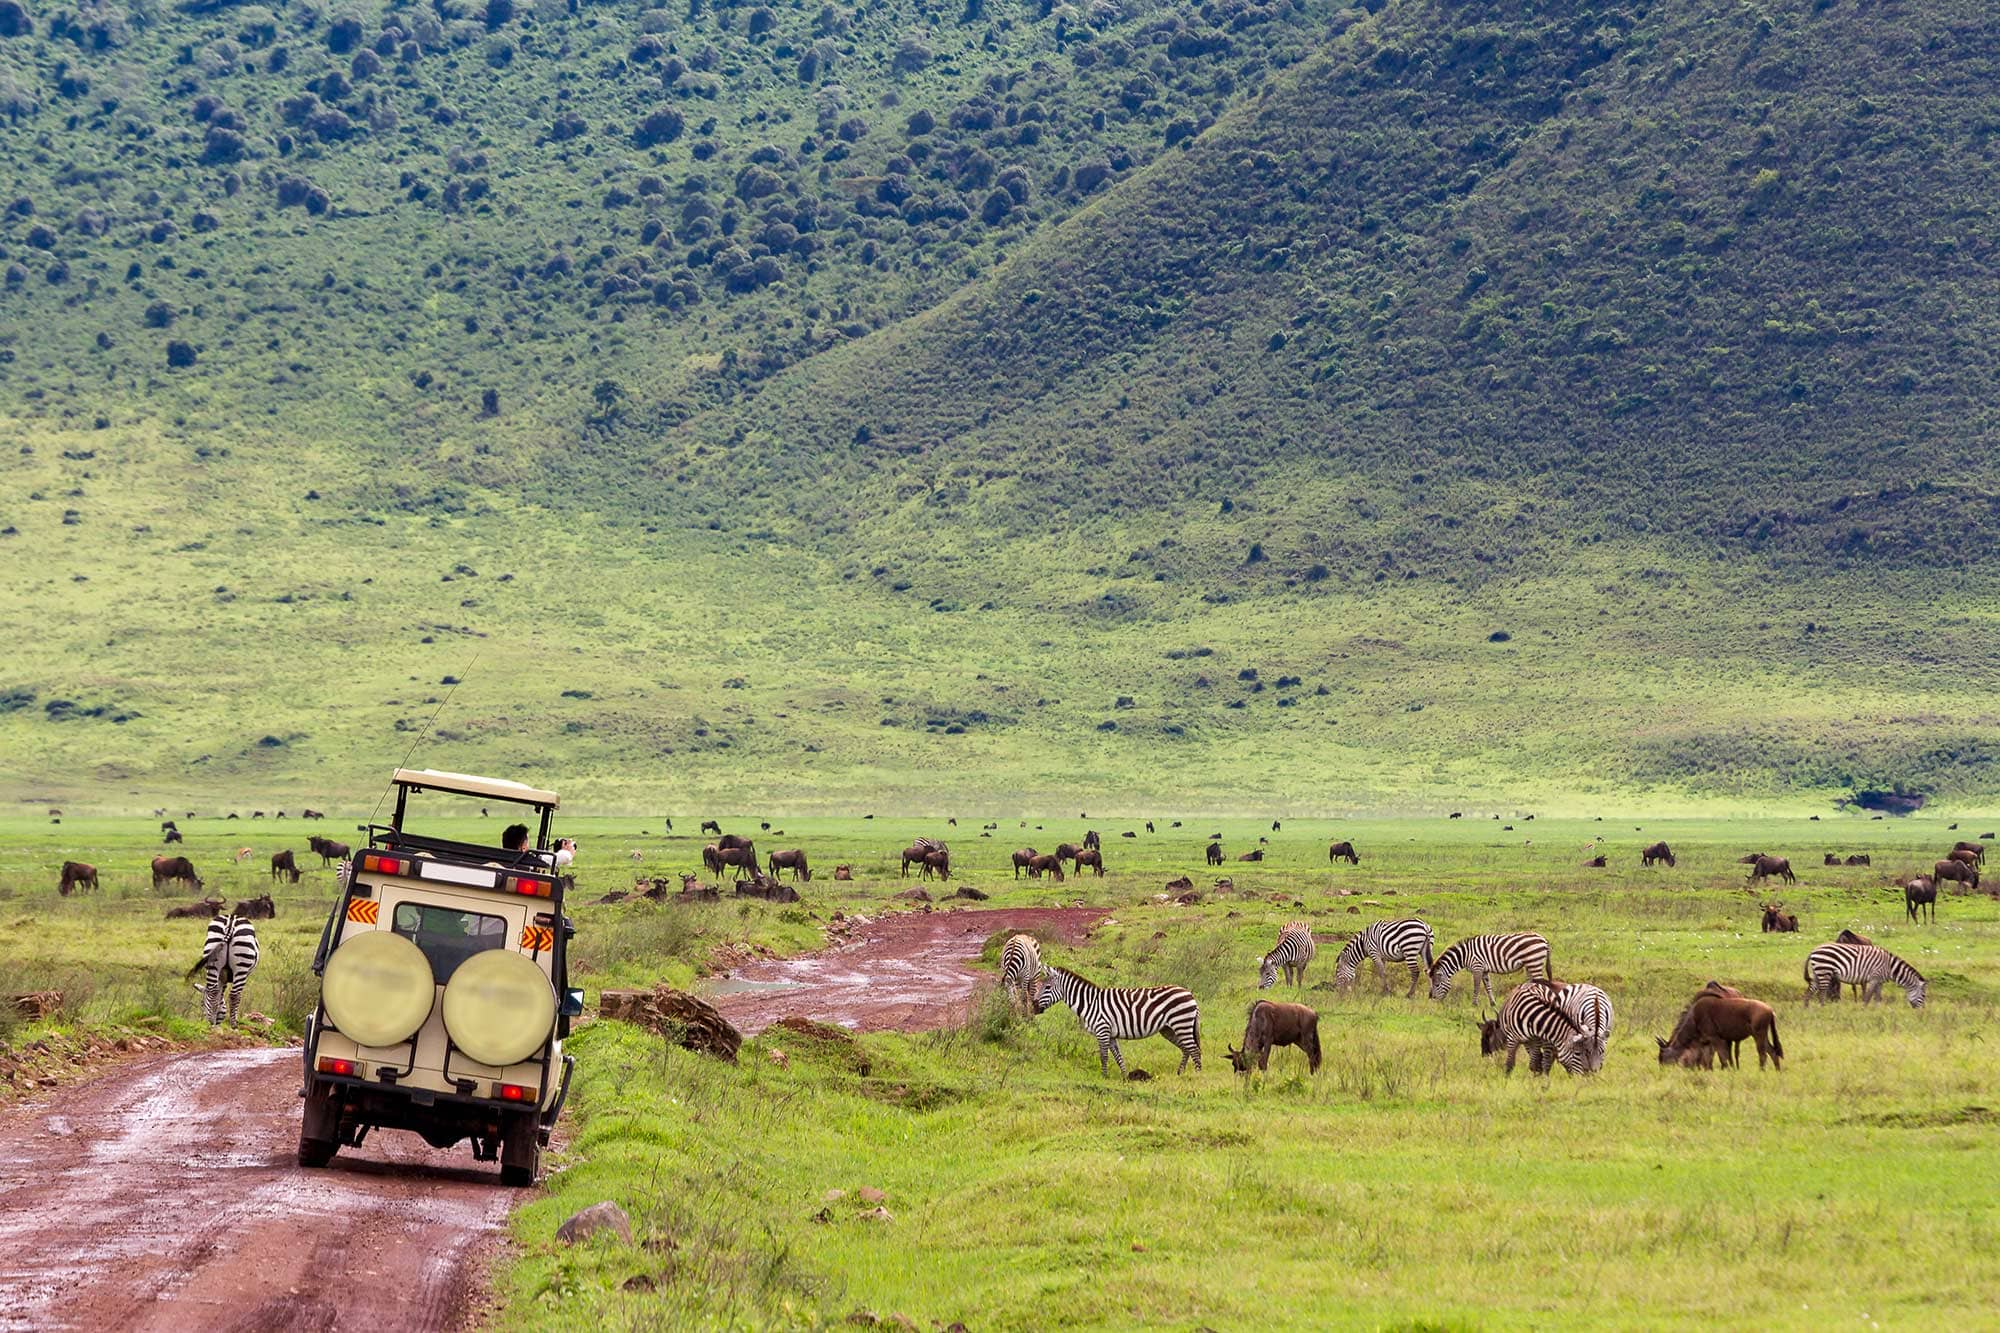 A safari vehicle drives along a dirt path past wildlife in the Ngorongoro Crater